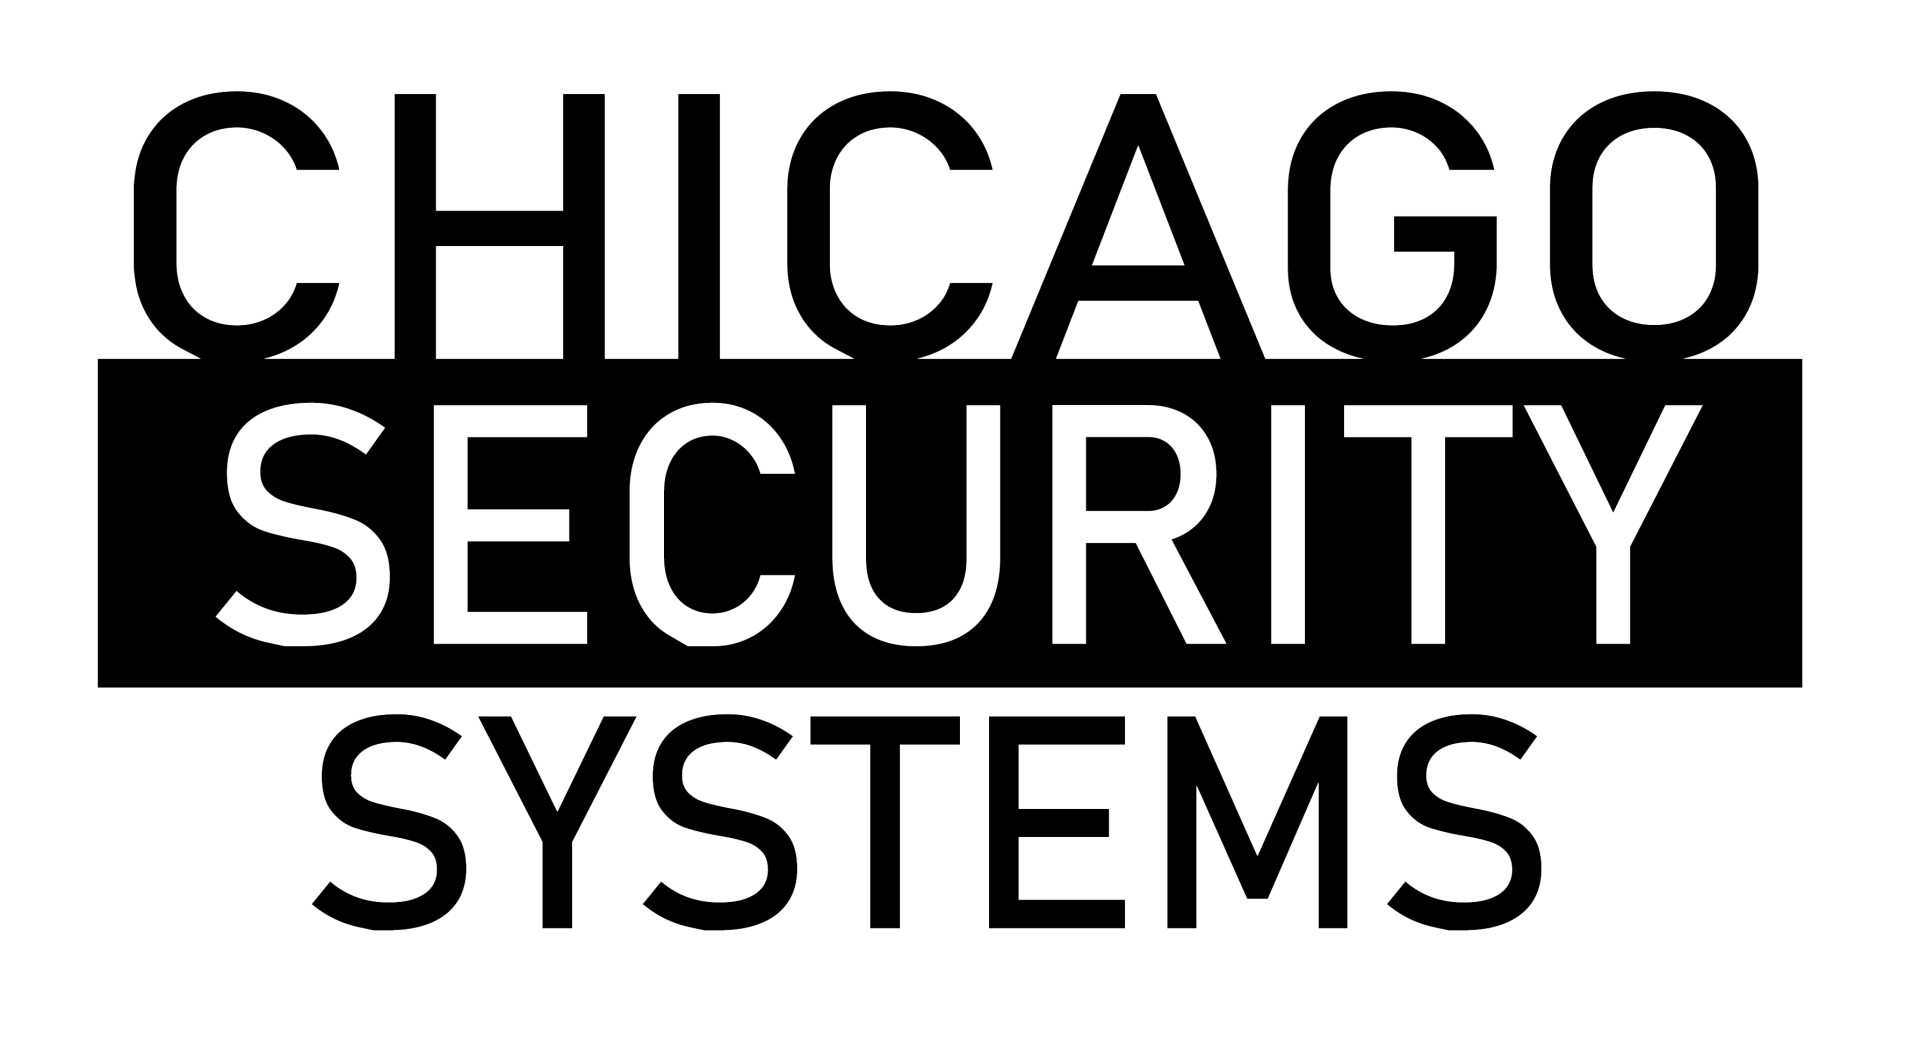 chicago security systems commercial security systems business